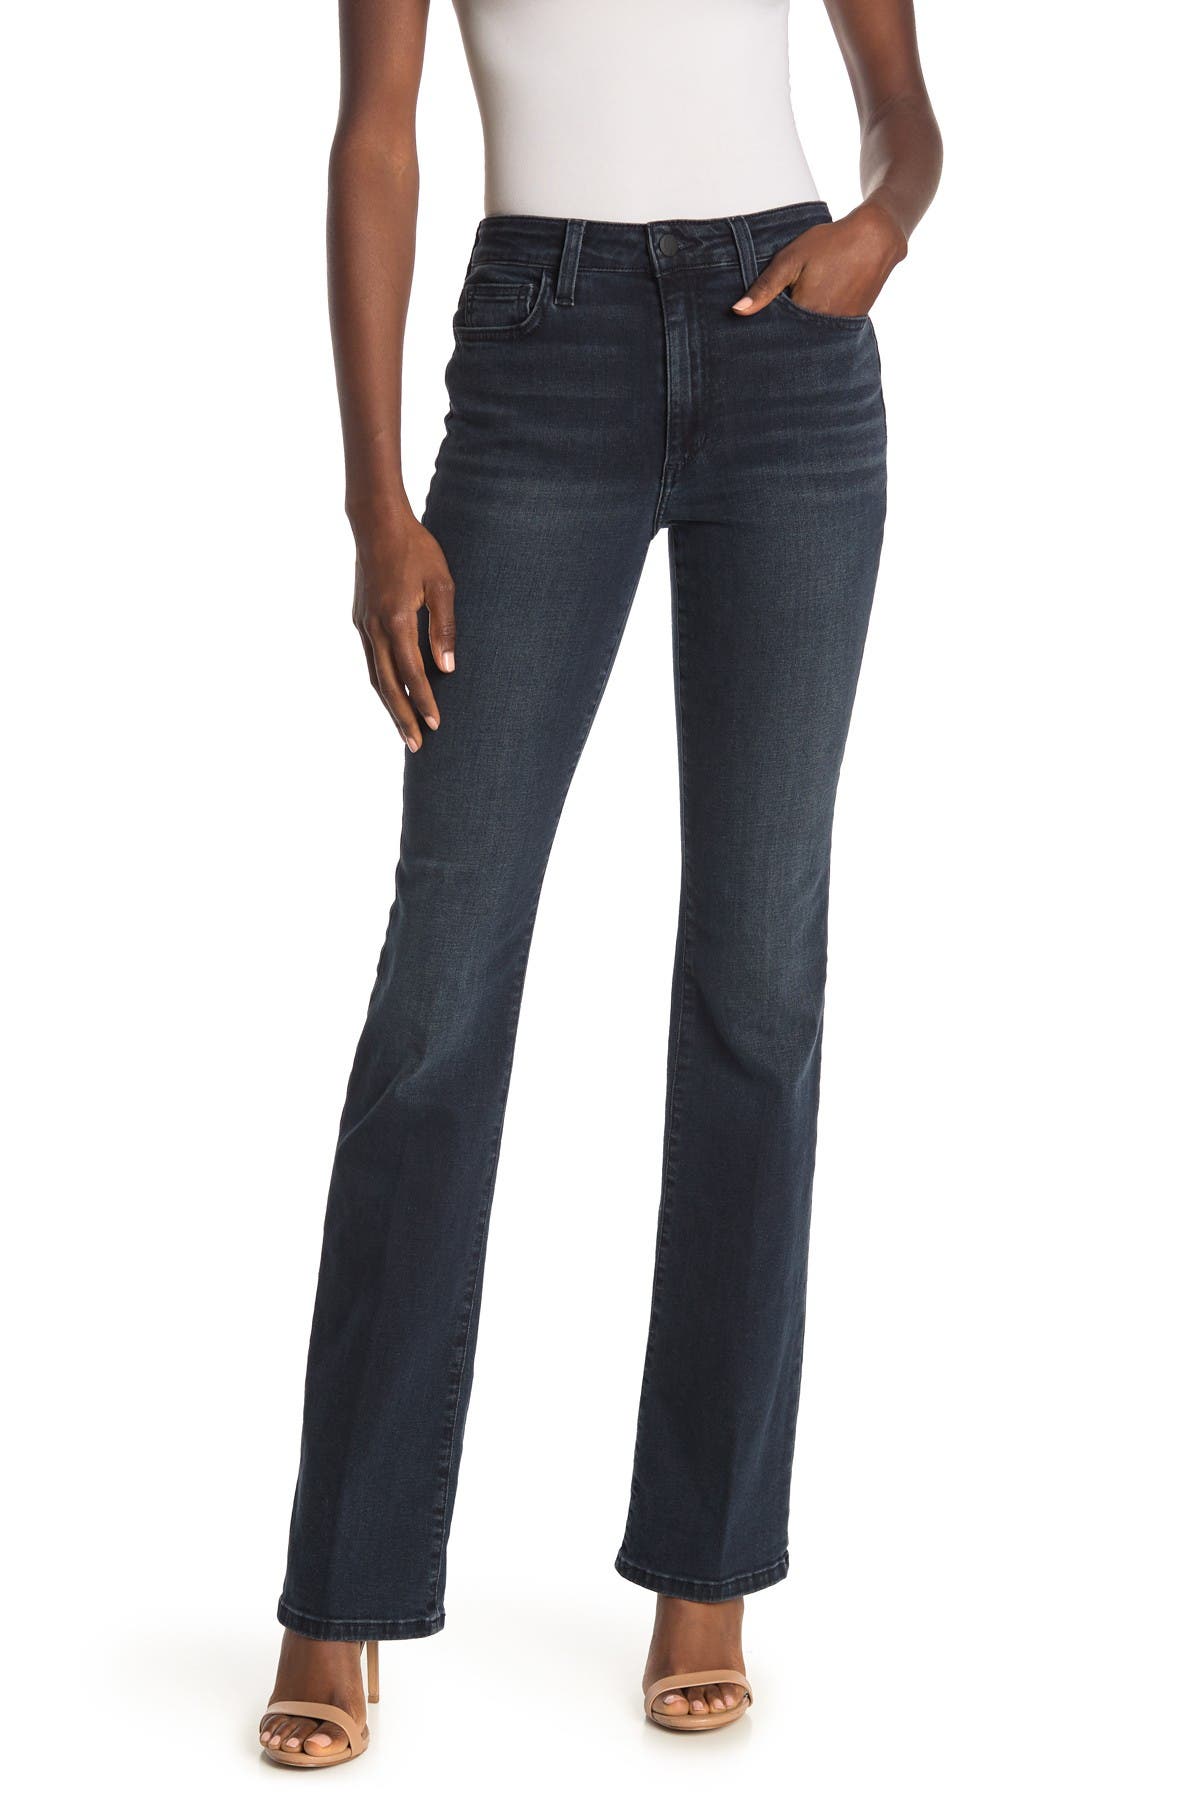 womens bootcut jeans on sale